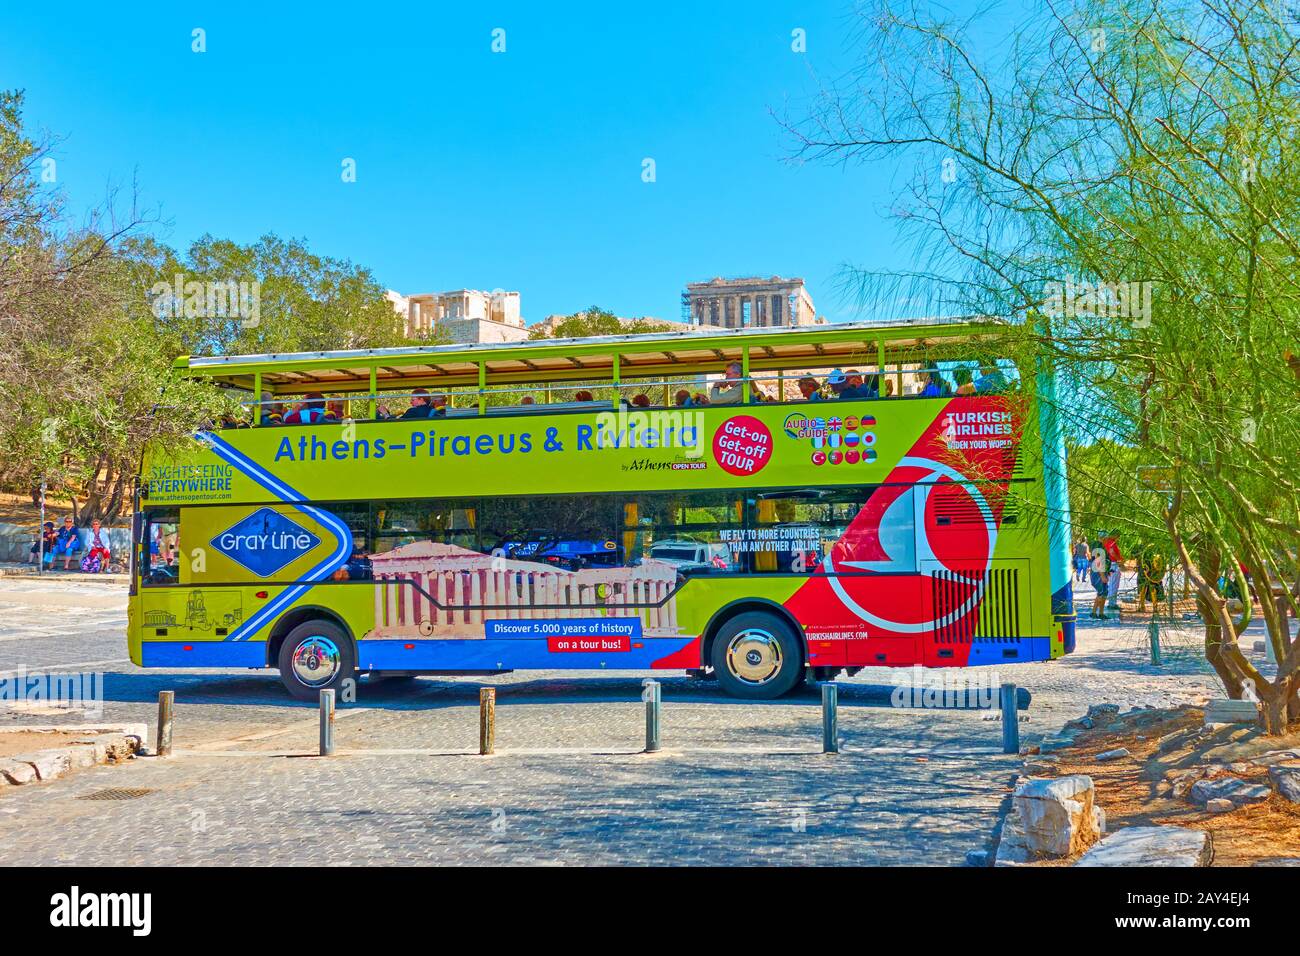 Athens, Greece  - September 21, 2019: Yellow Hop On Hop Off Bus near Acropolis hill in Athens Stock Photo